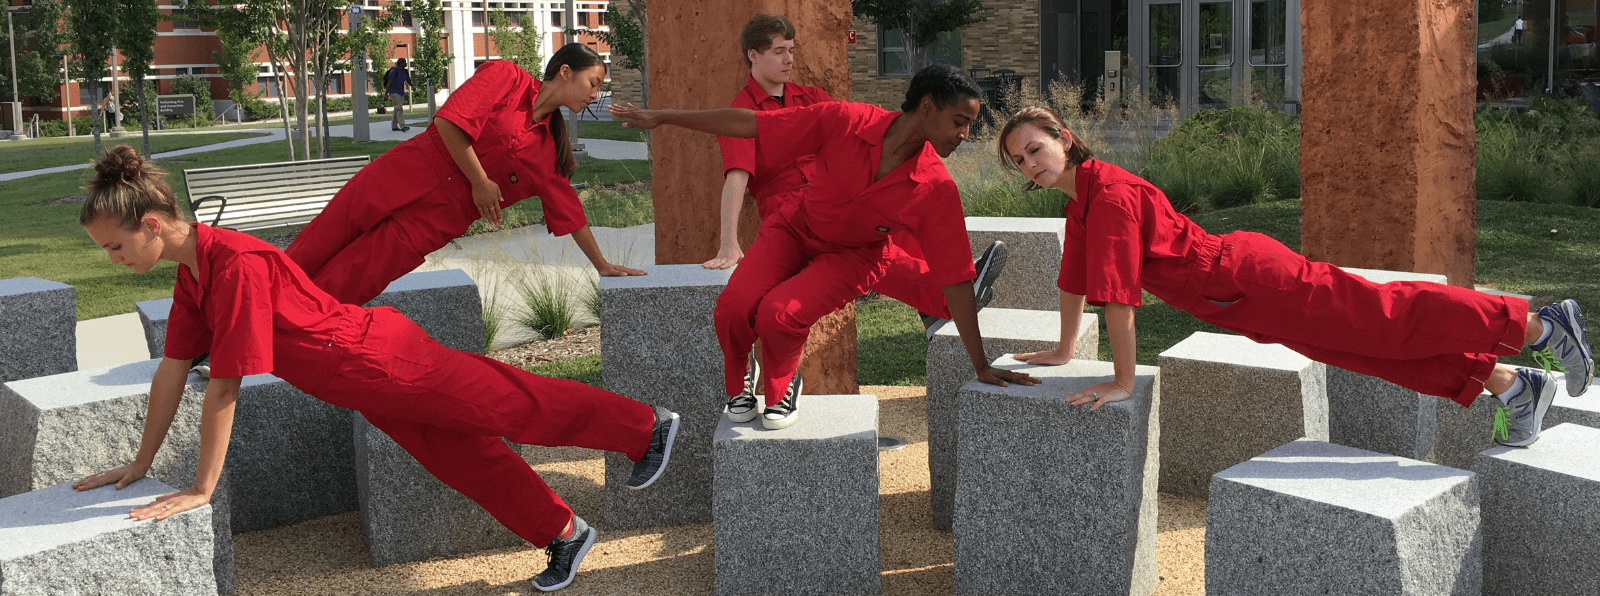 People on top of concrete blocks in various poses